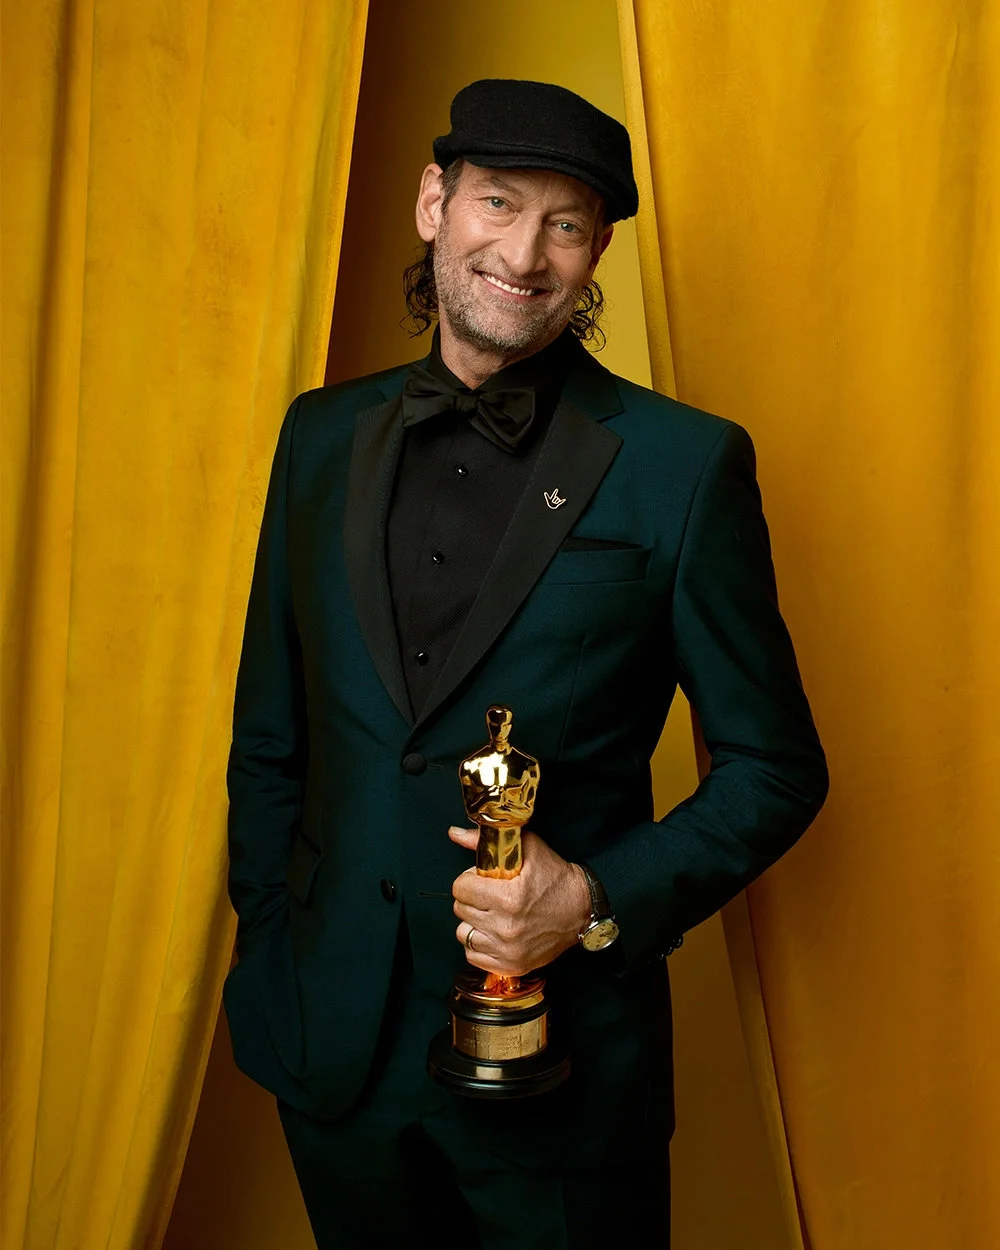 Troy Kotsur in "Variety" magazine ​​​with his Oscar trophy ​​​